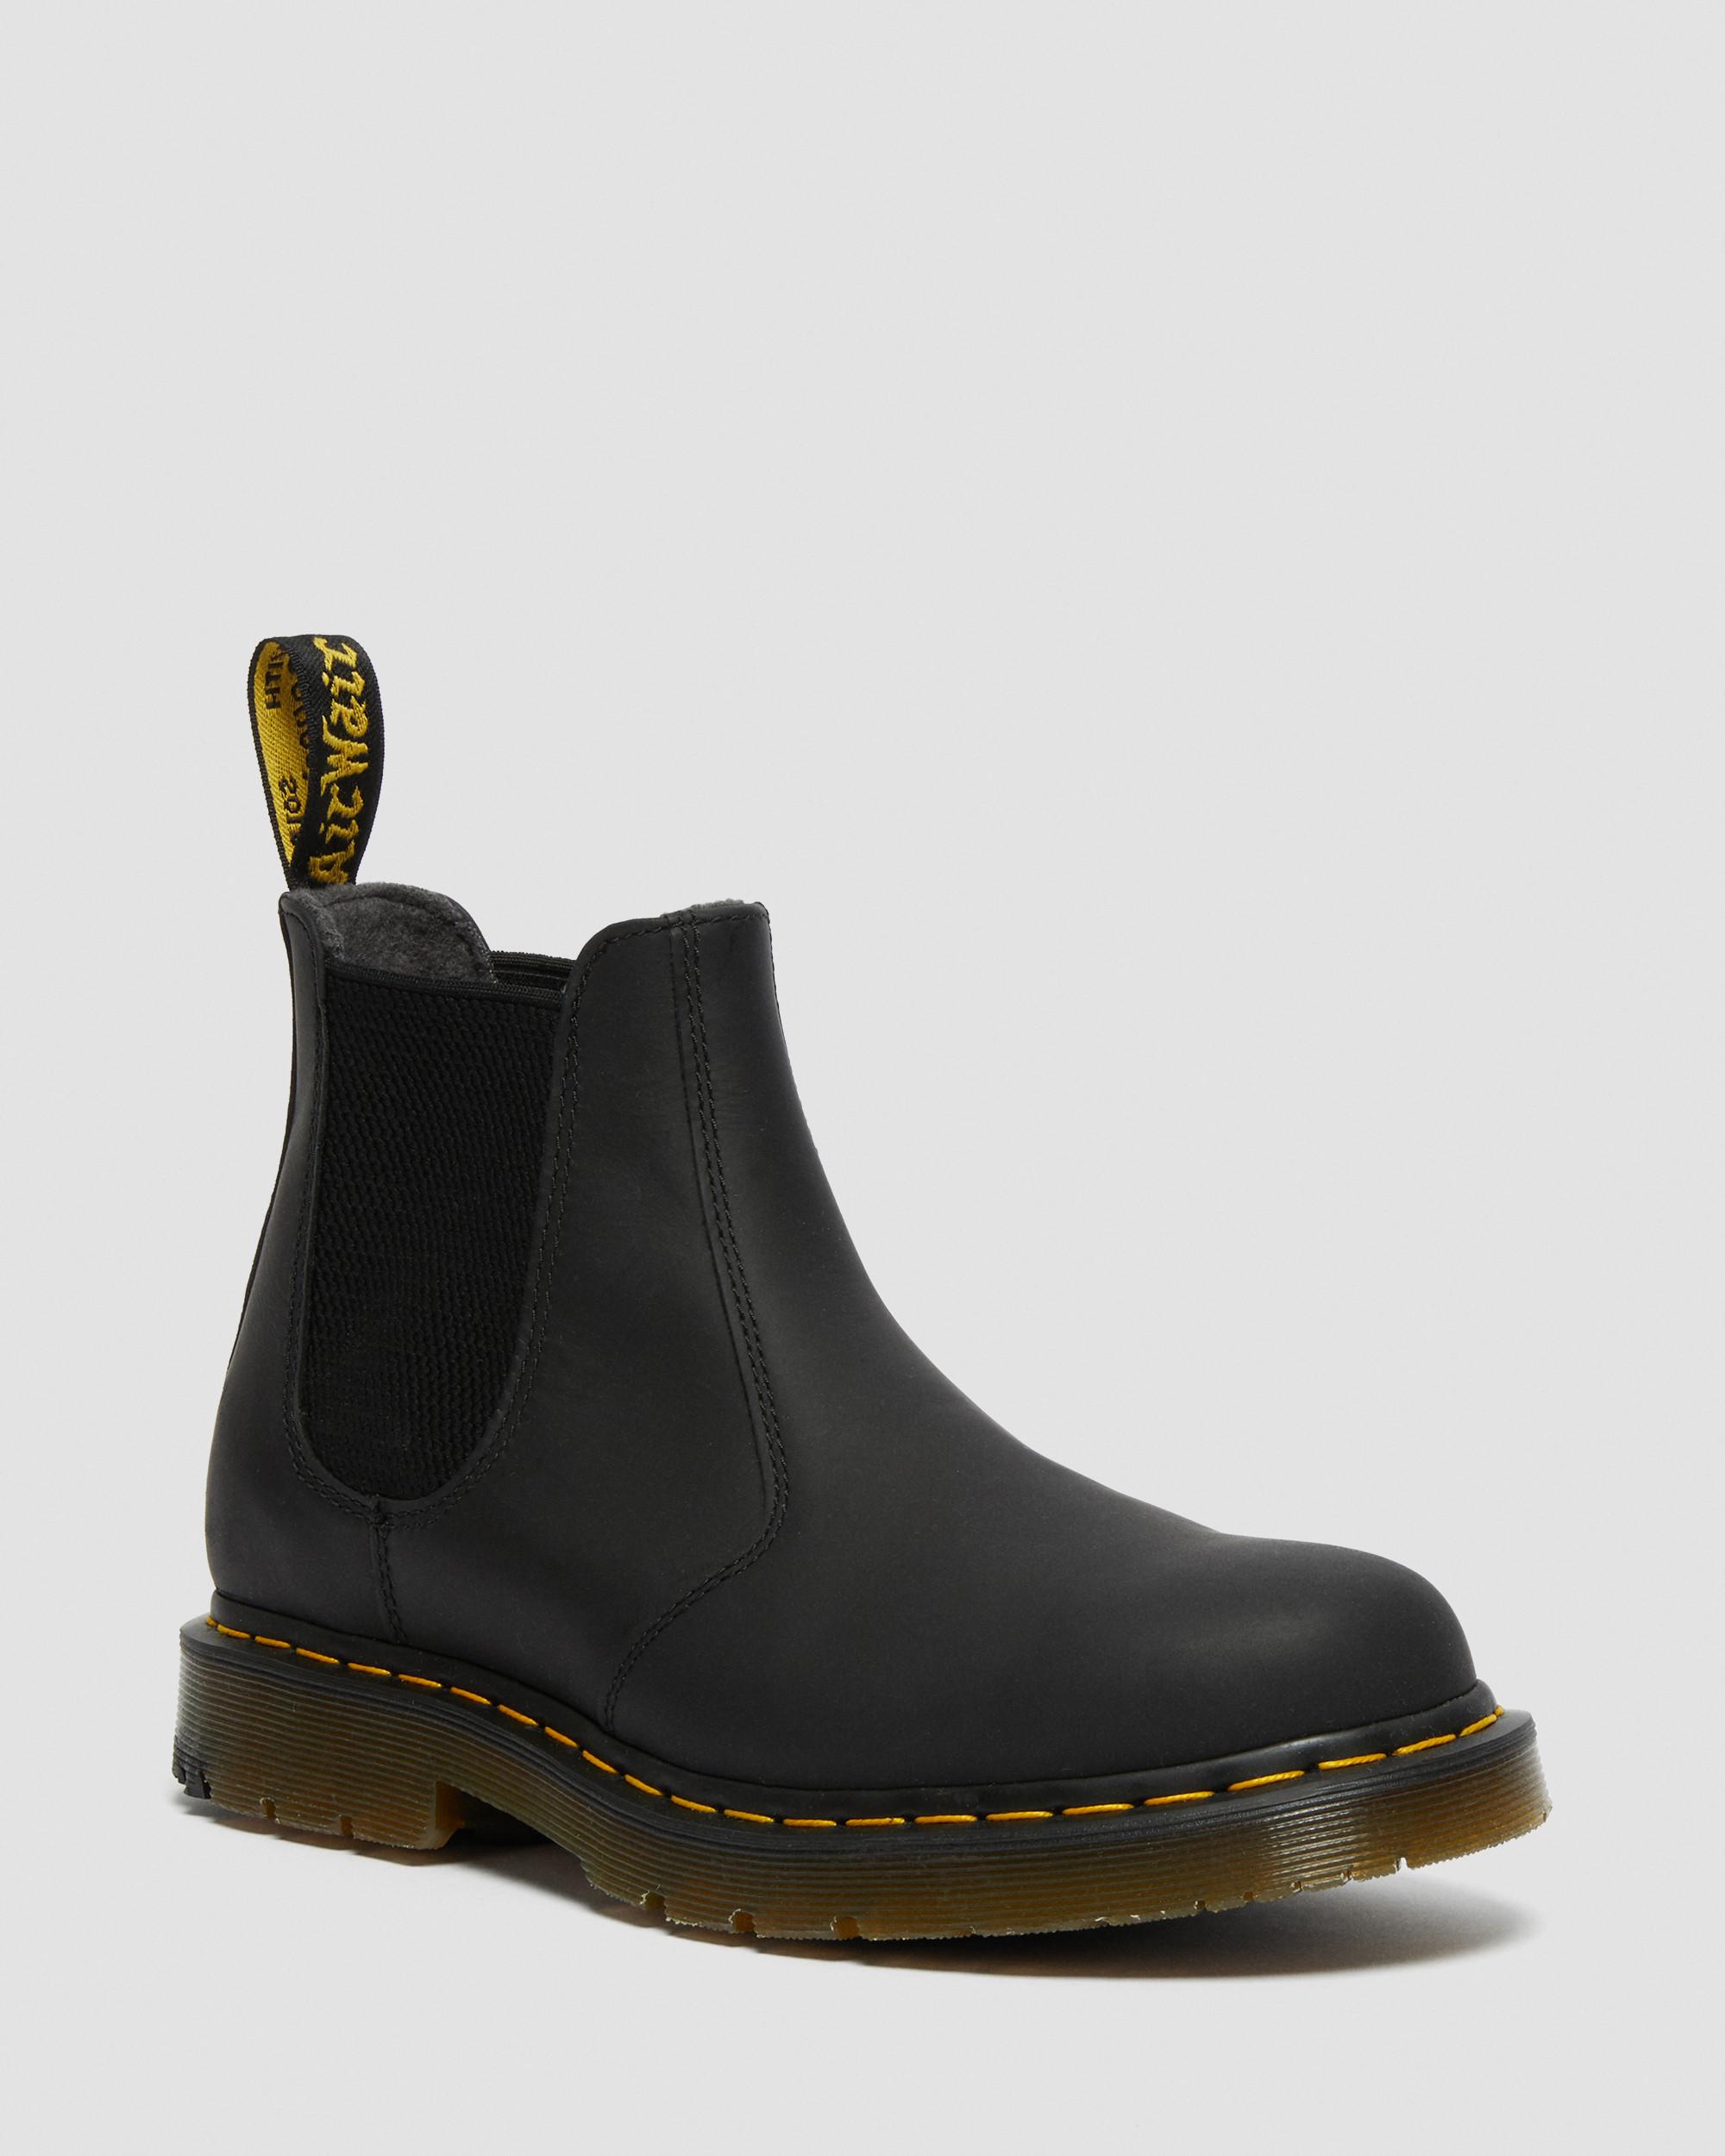 2976 DM's Wintergrip Chelsea Boots in | Dr. Martens